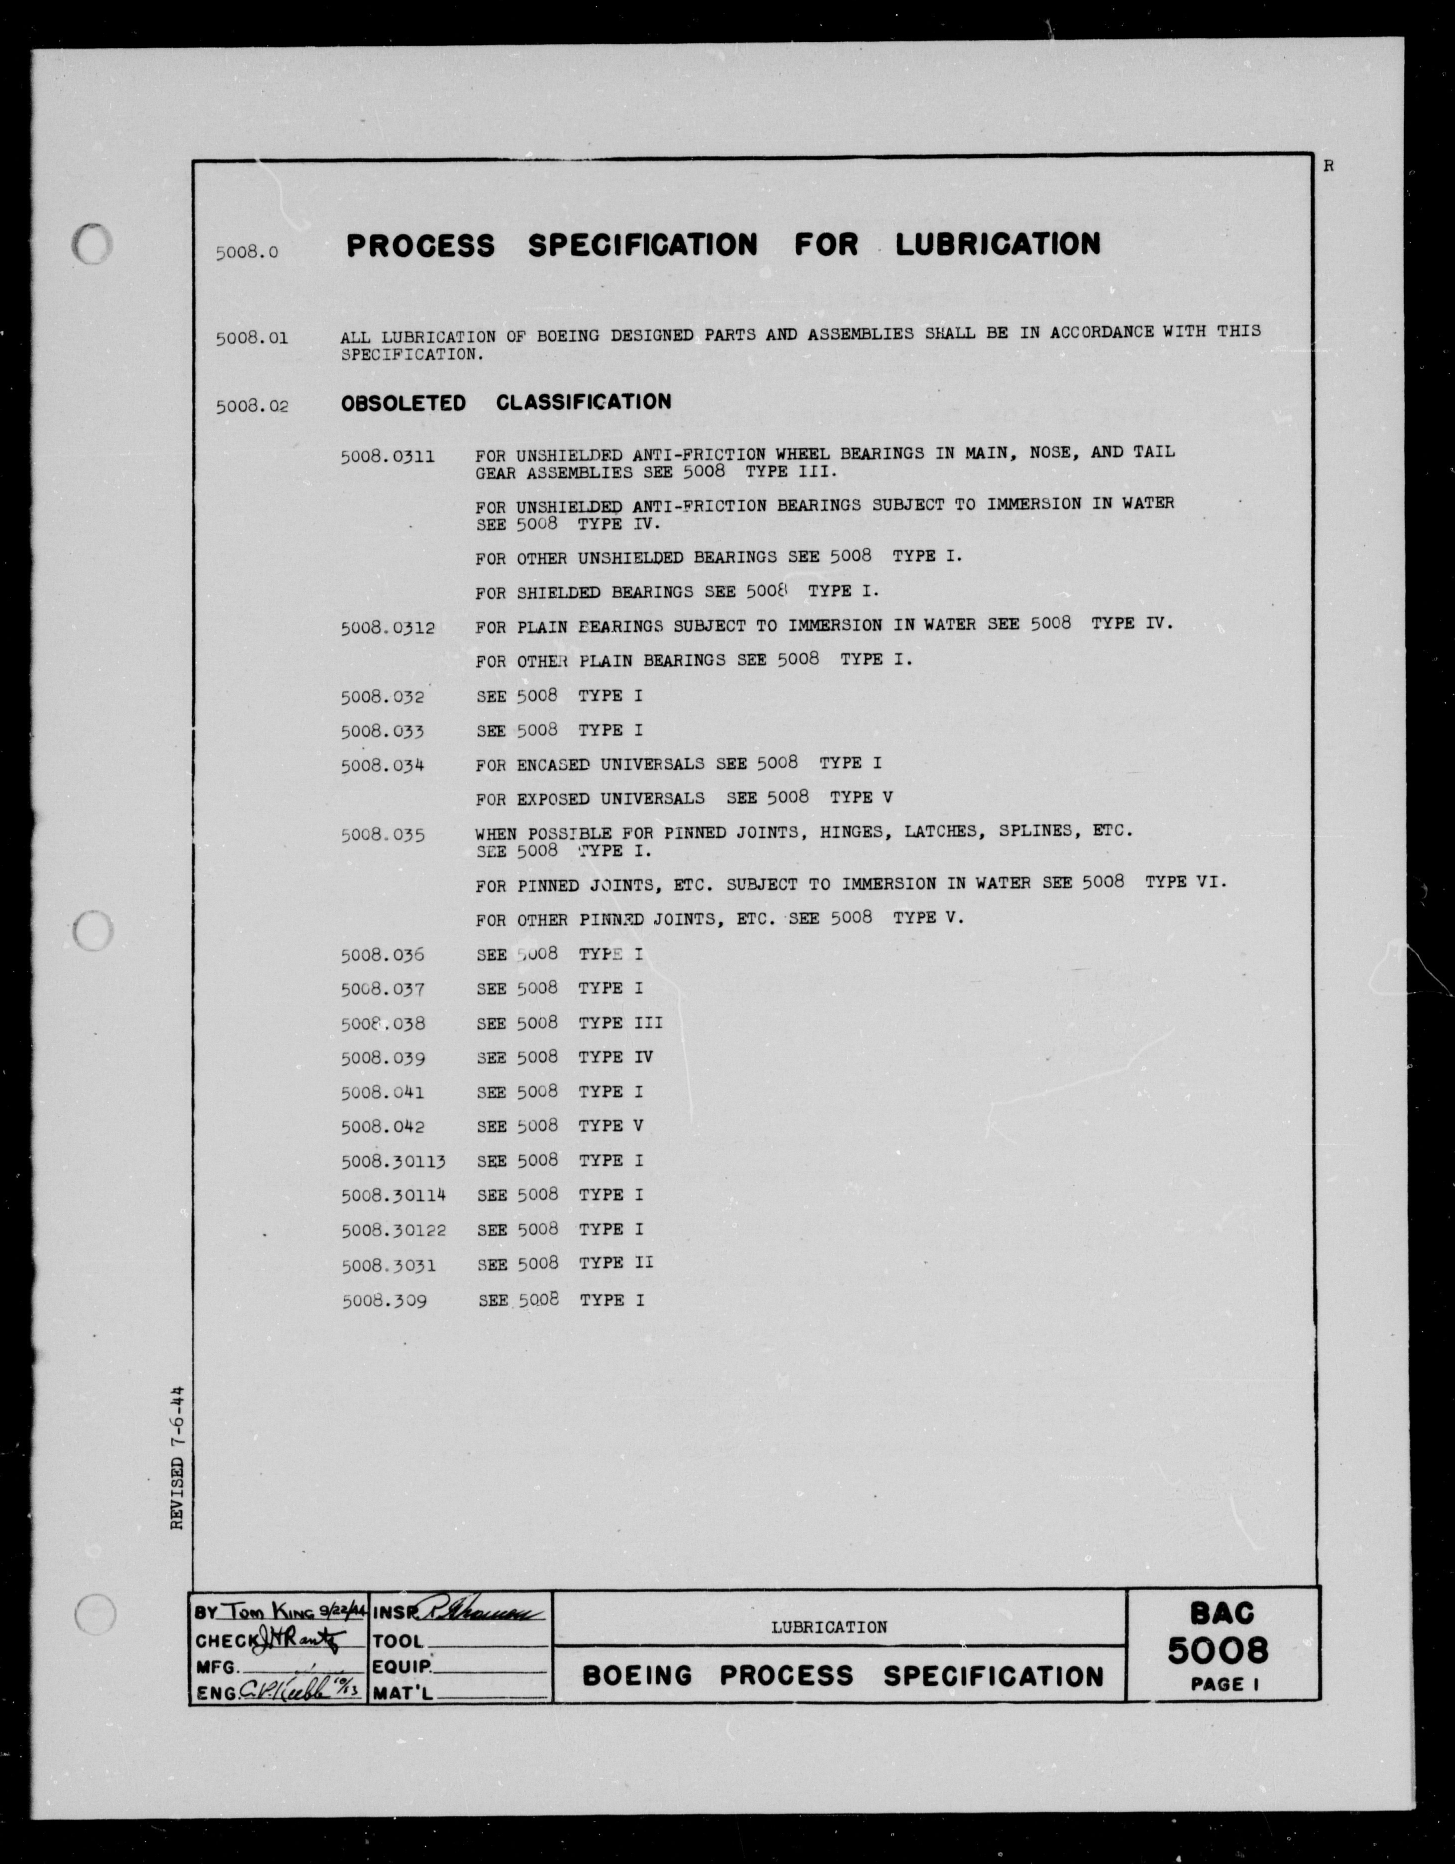 Sample page 1 from AirCorps Library document: Process Specification for Lubrication